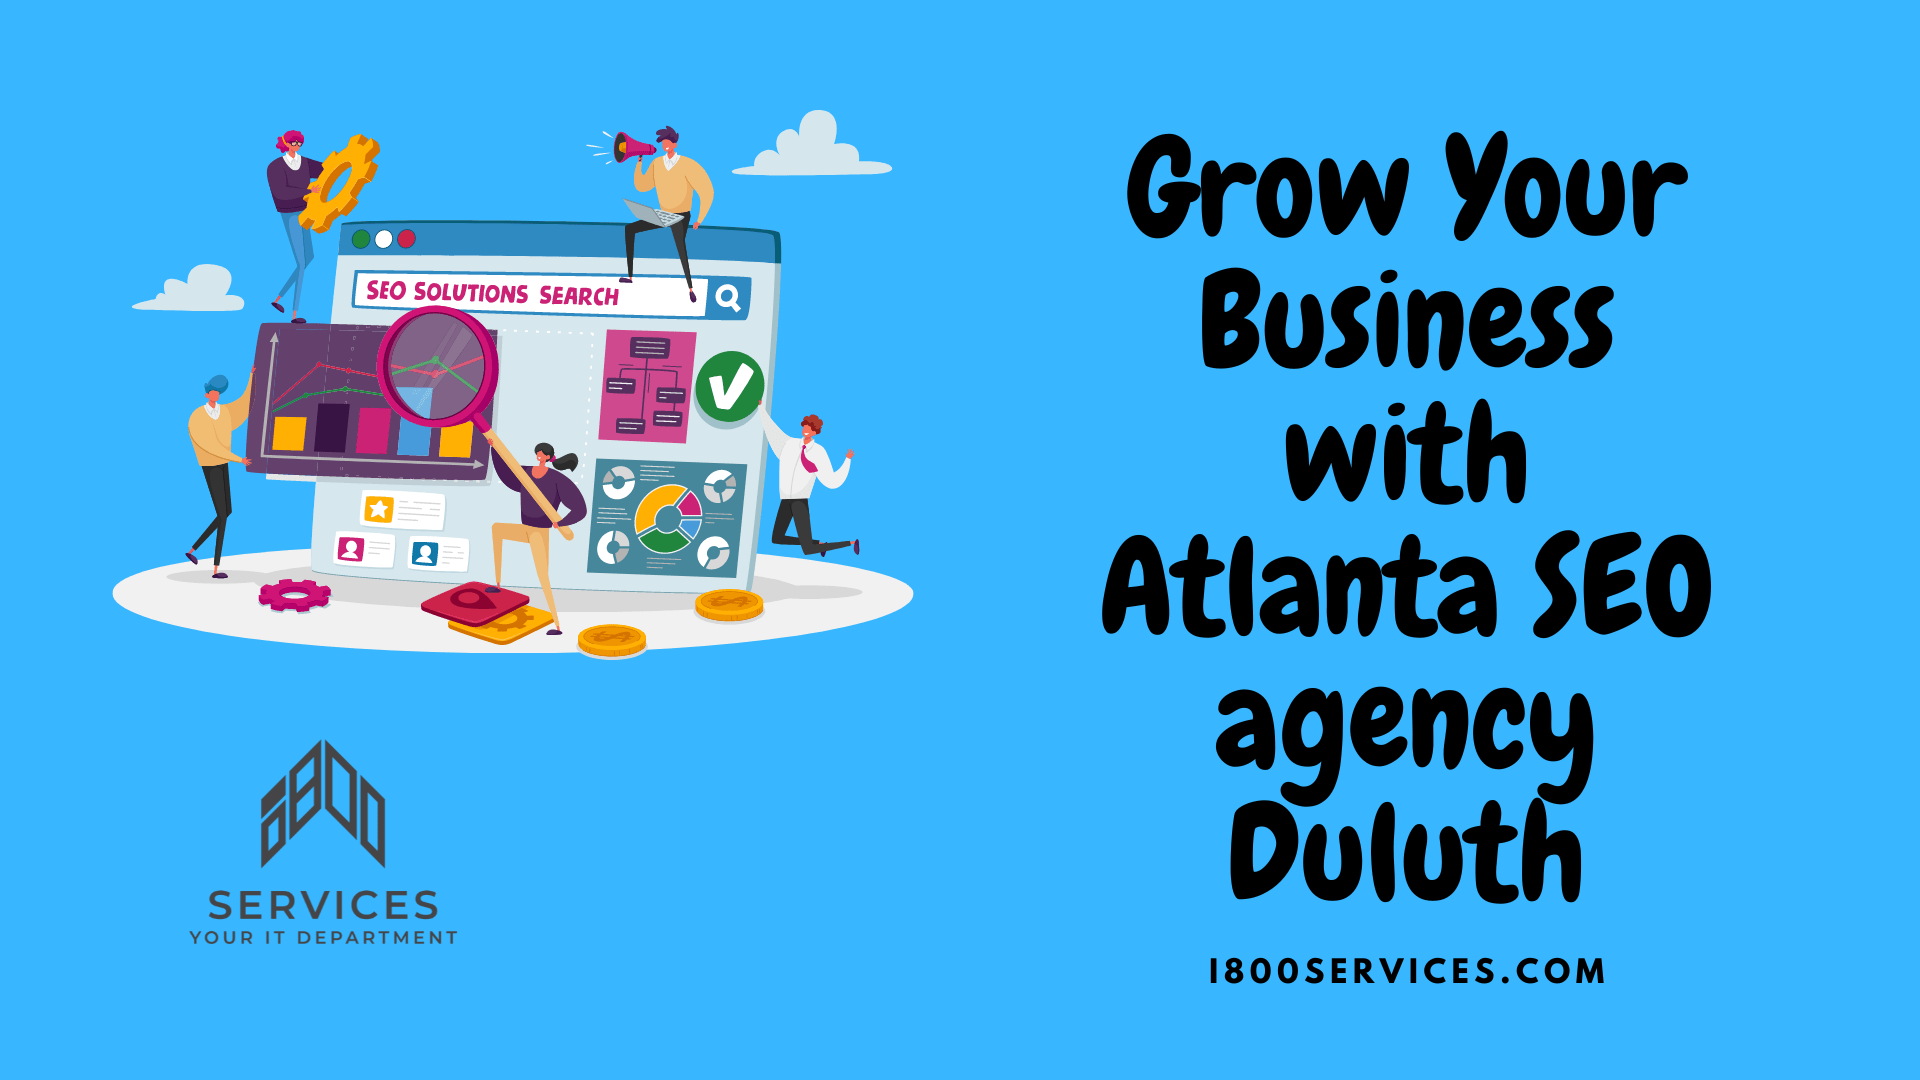 Grow Your Business with Atlanta SEO consultant Duluth